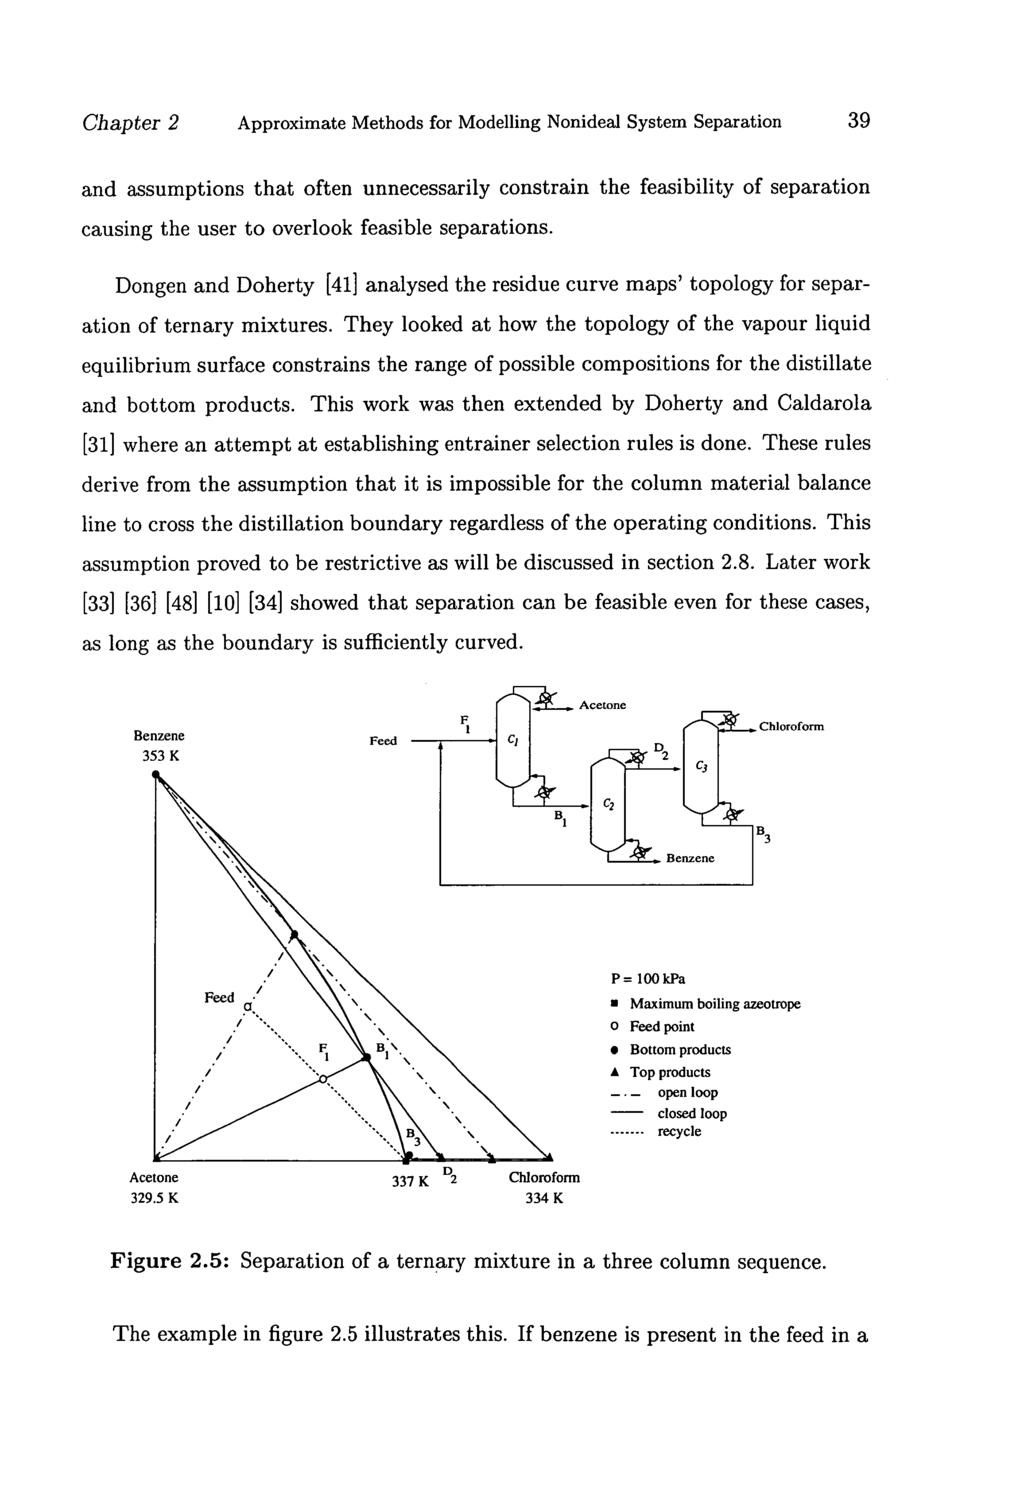 Chapter 2 Approximate Methods for Modelling Nonideal System Separation 39 and assumptions that often unnecessarily constrain the feasibility of separation causing the user to overlook feasible